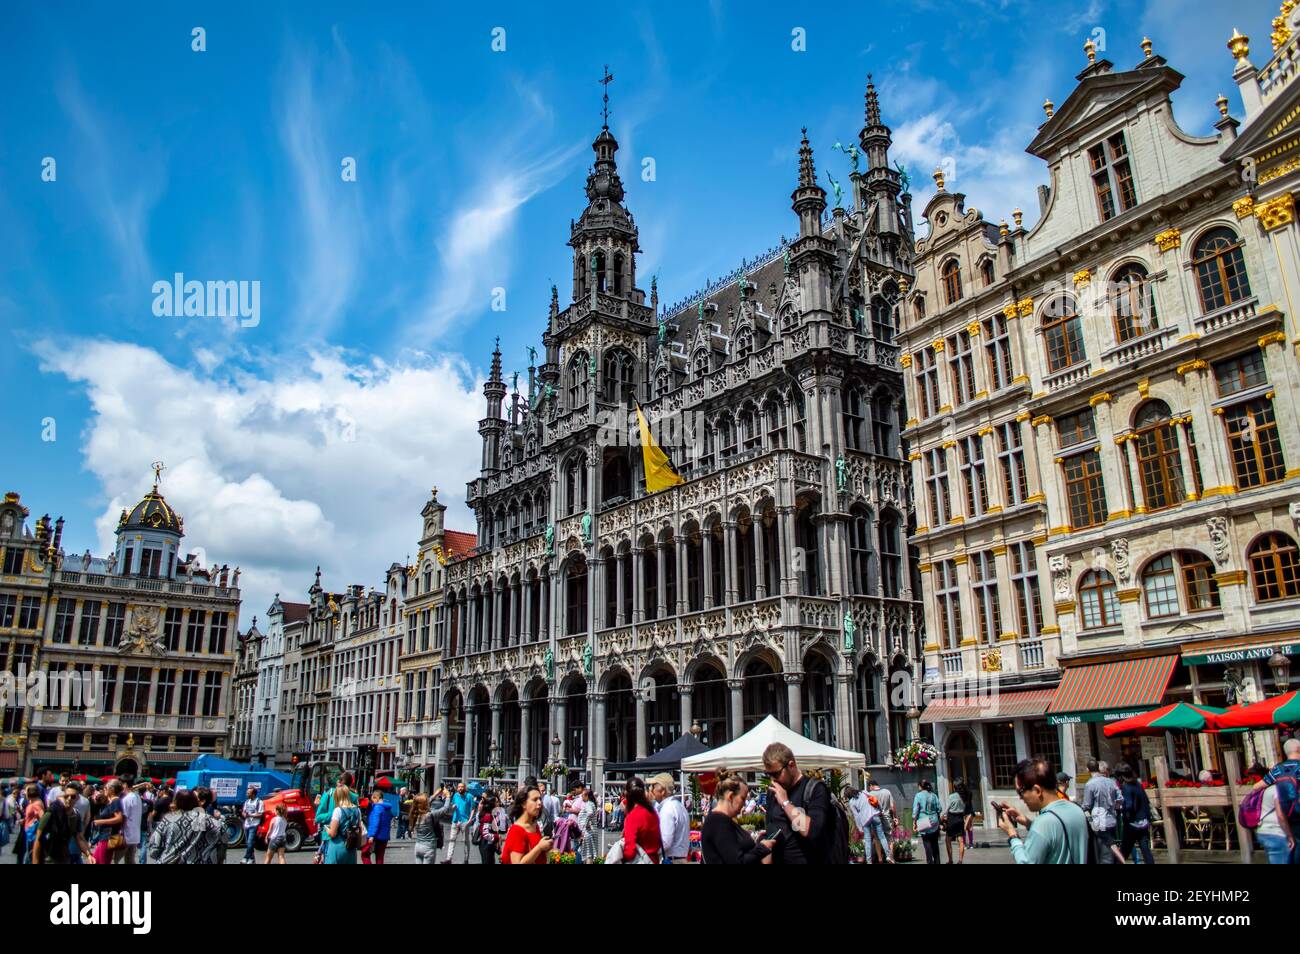 Brussels, Belgium - July 13, 2019: Grand Place, the central square of Brussels, Belgium, crowded on a sunny summer day Stock Photo